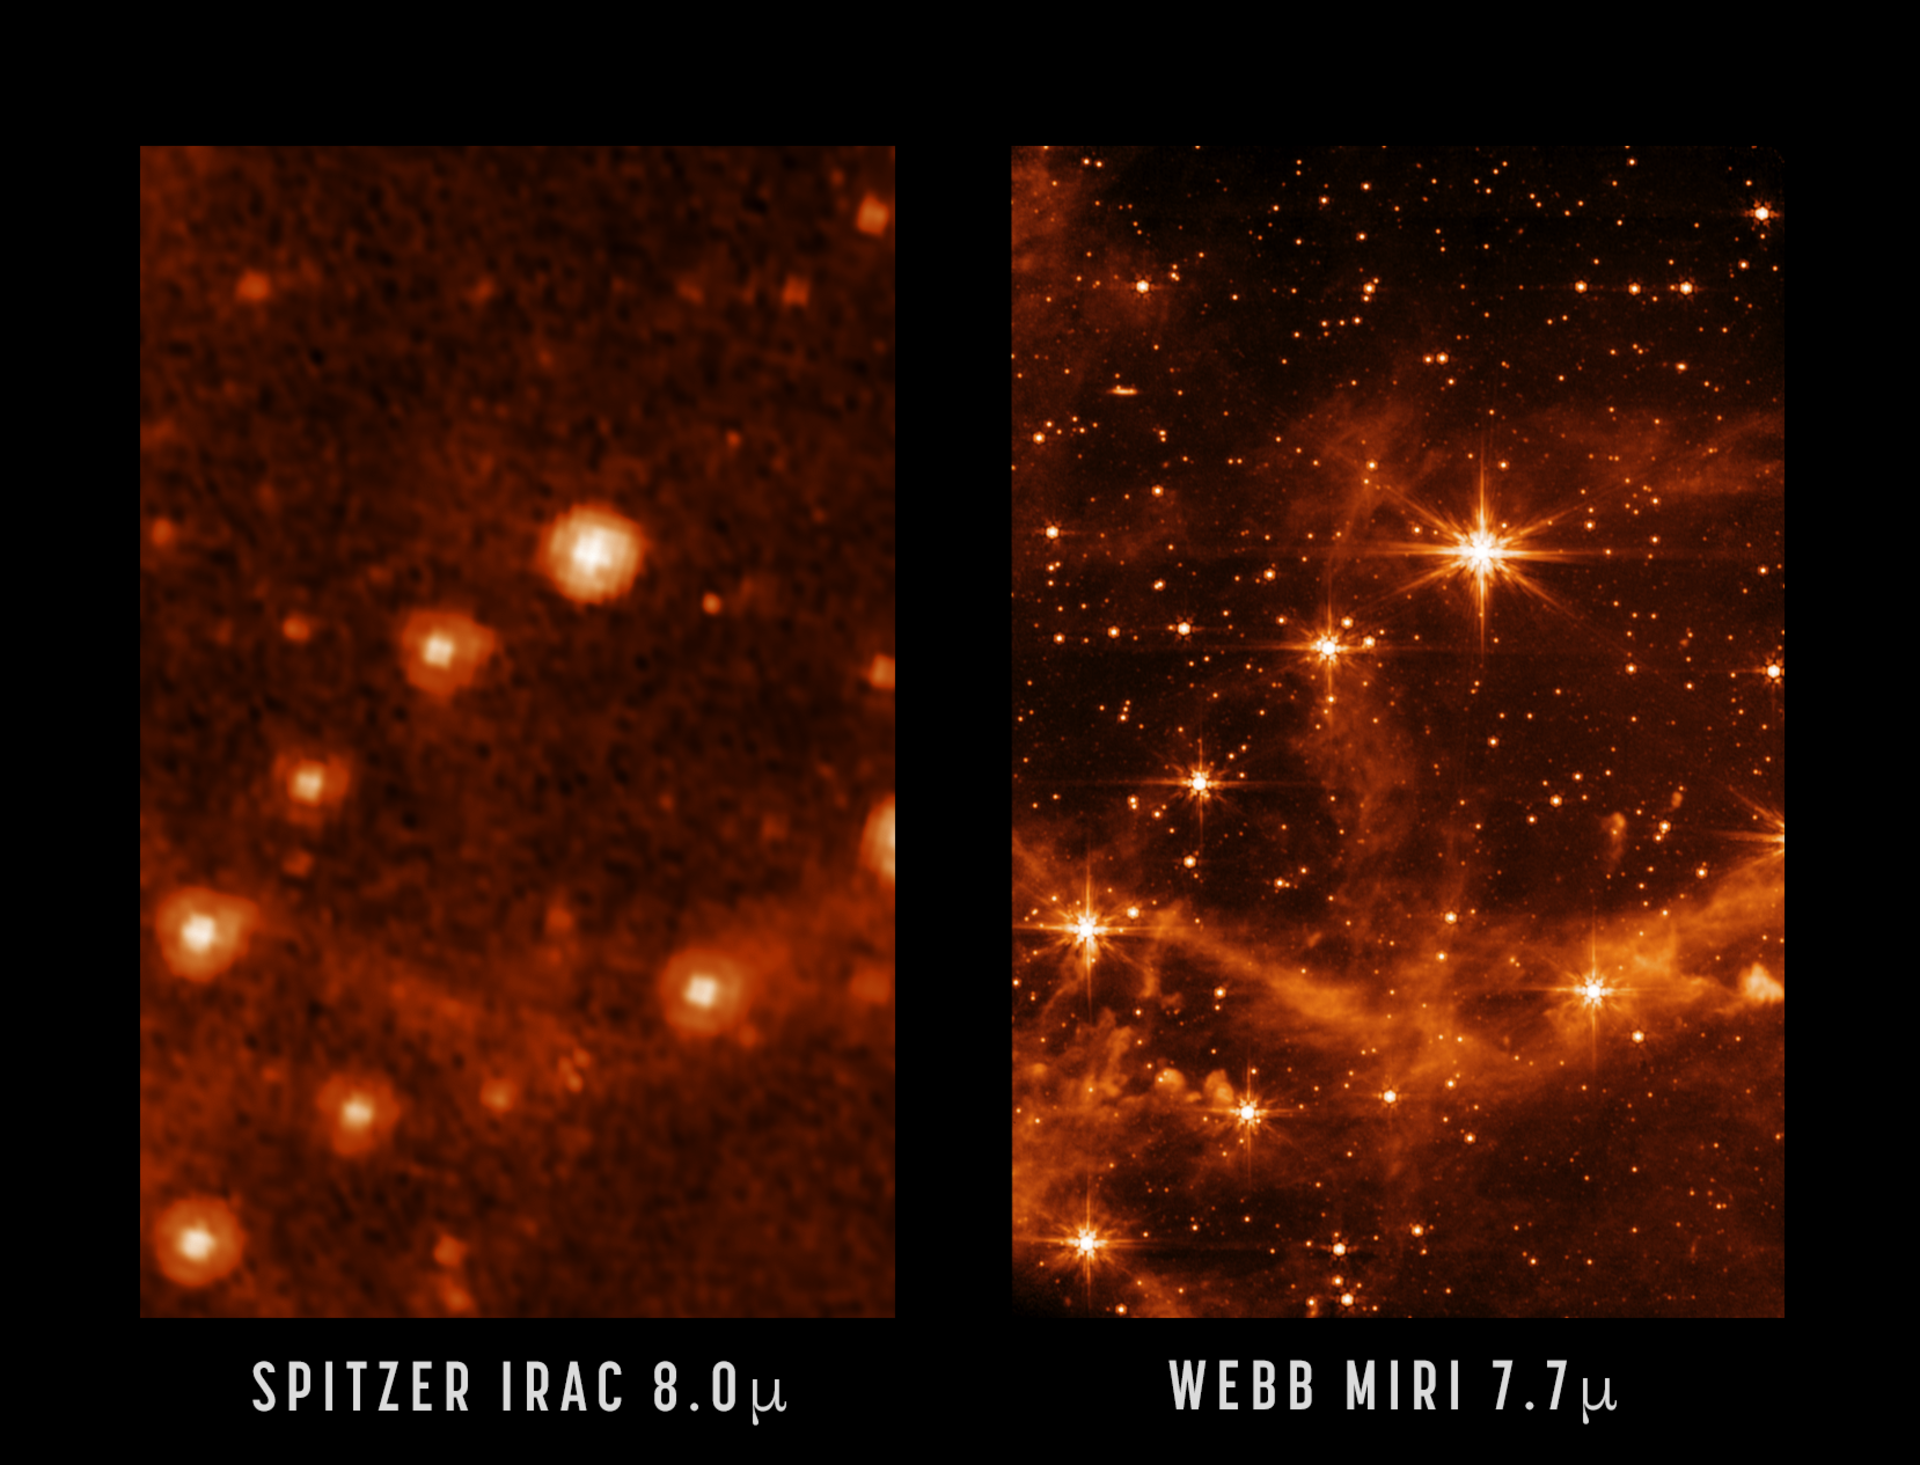 Two orange images showing a series of bright dots - the left one is much fuzzier than the right one